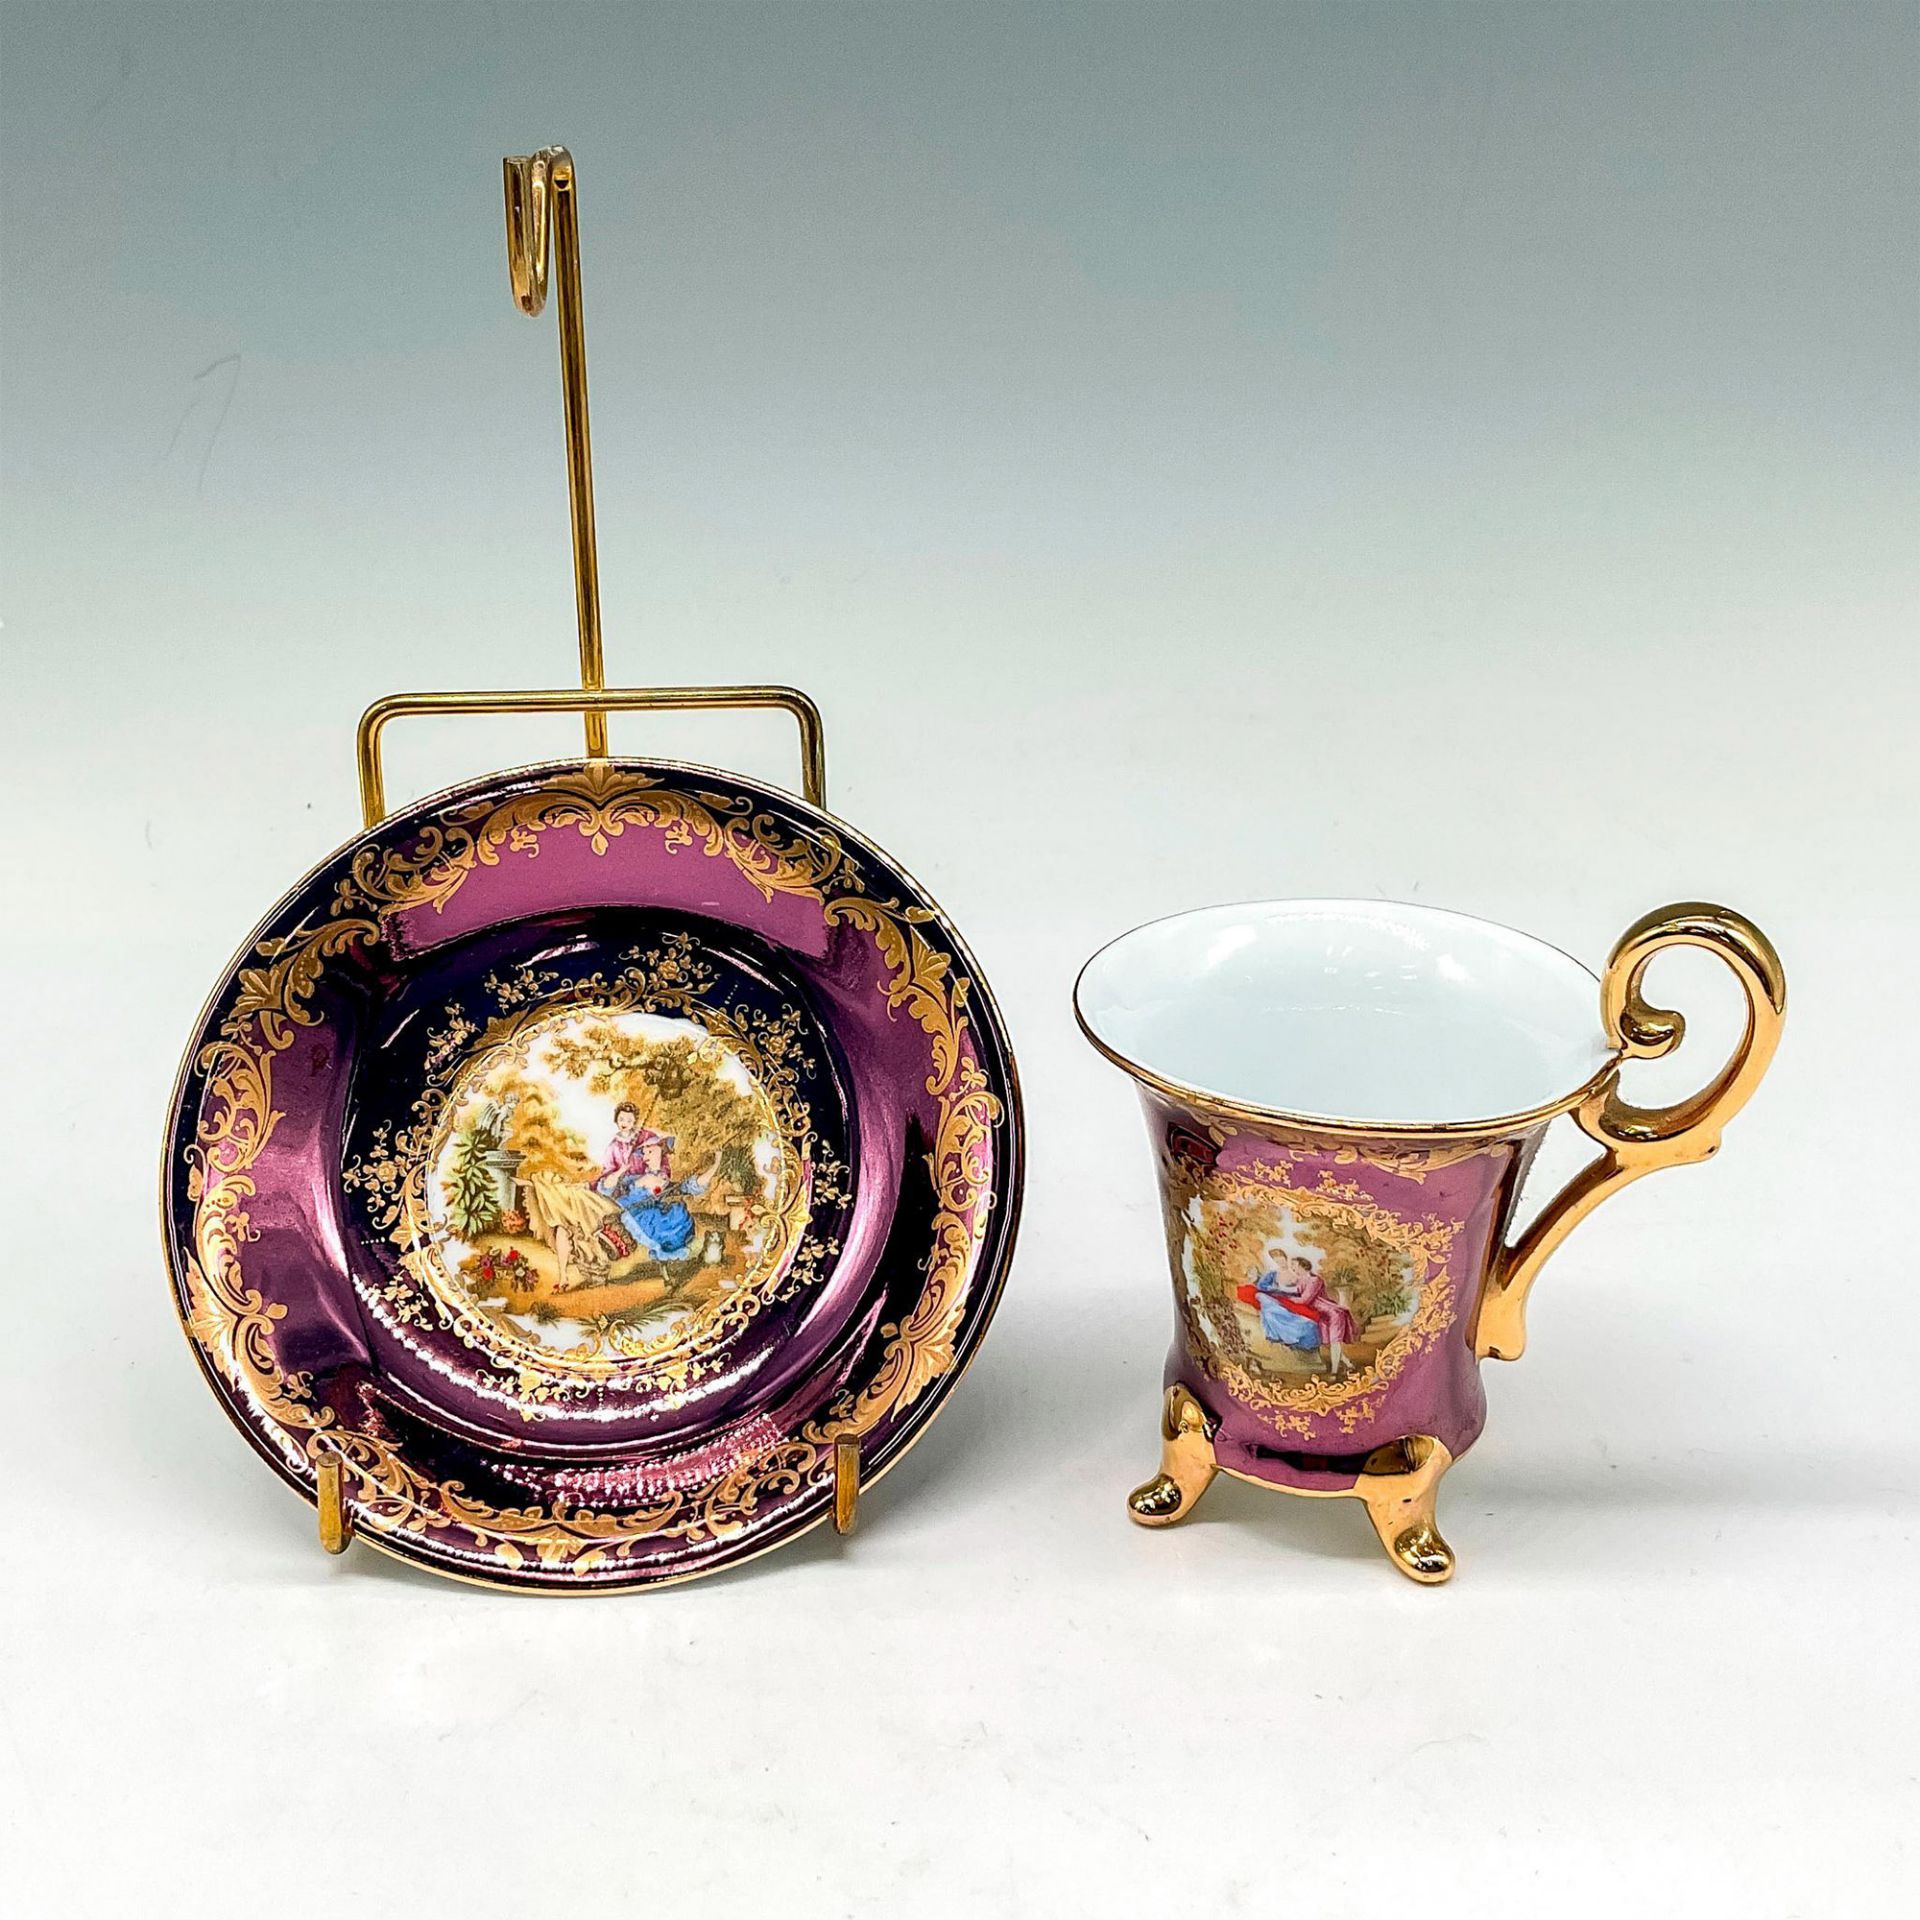 3pc Limoges Royal Purple and 24kt Gold Teacup and Saucer - Image 2 of 3